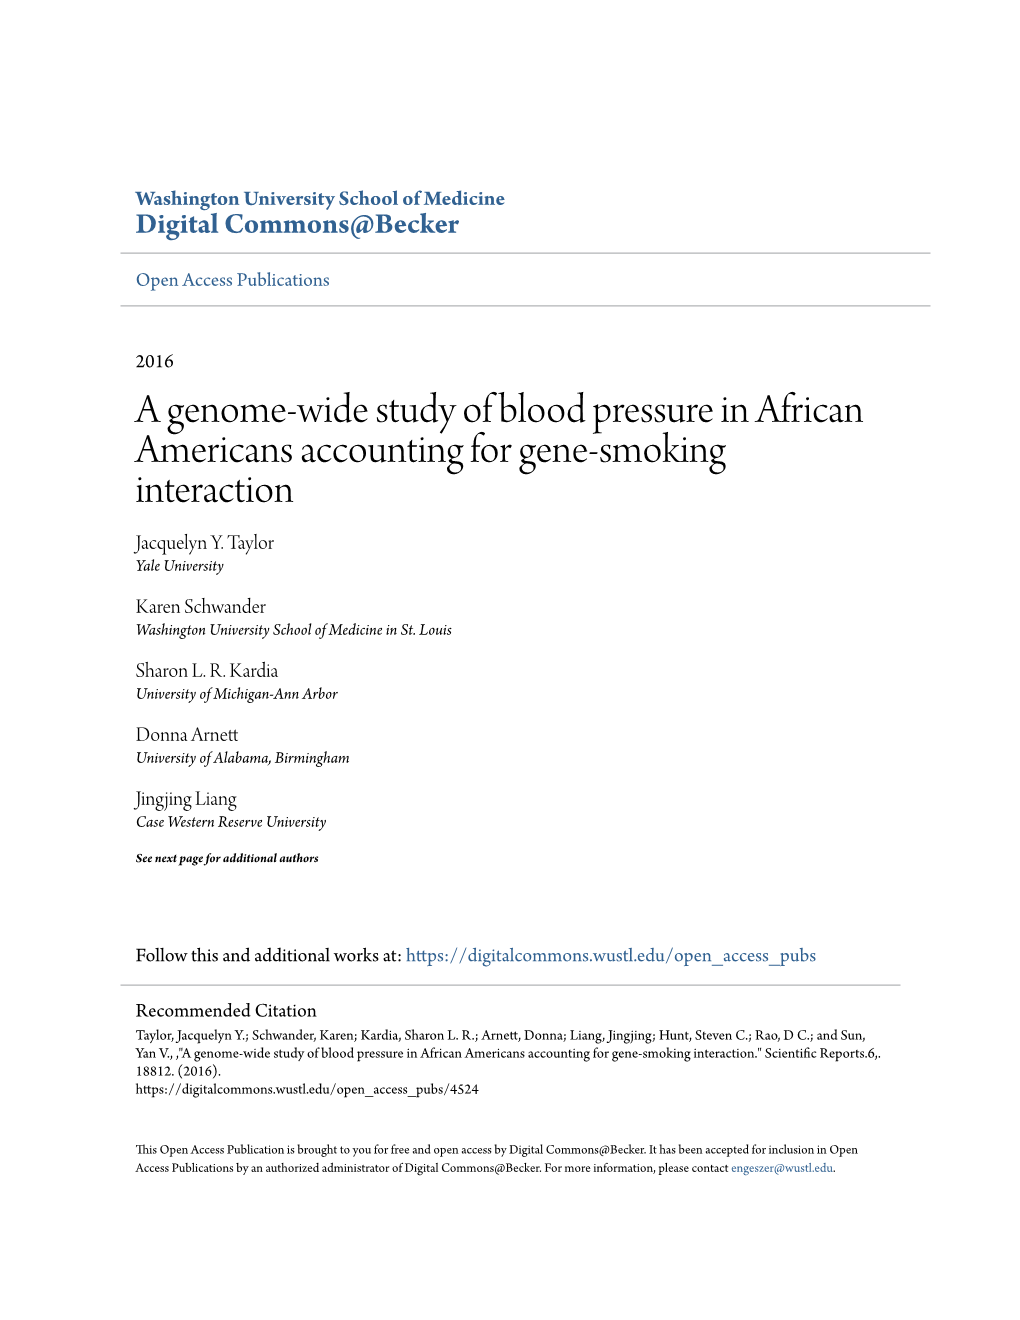 A Genome-Wide Study of Blood Pressure in African Americans Accounting for Gene-Smoking Interaction Jacquelyn Y